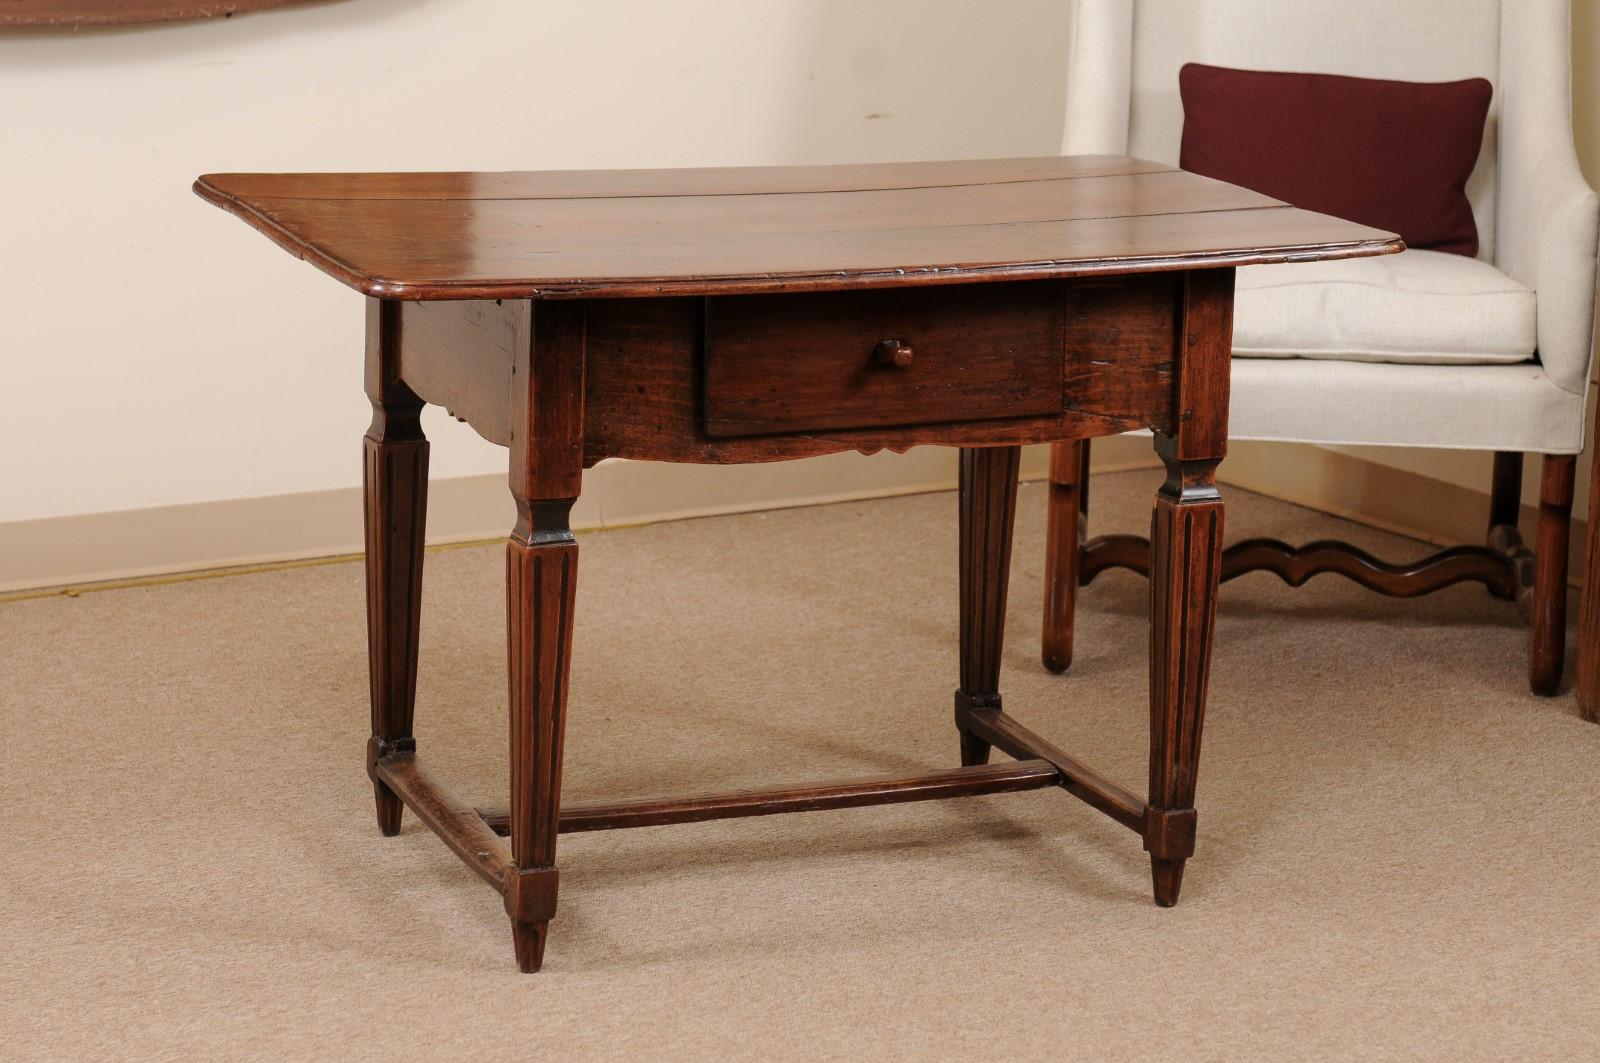 Late 18th Century French Walnut Writing Table/Work Table with Fluted Legs, Drawer, & Stretcher. Finished on All Sides.